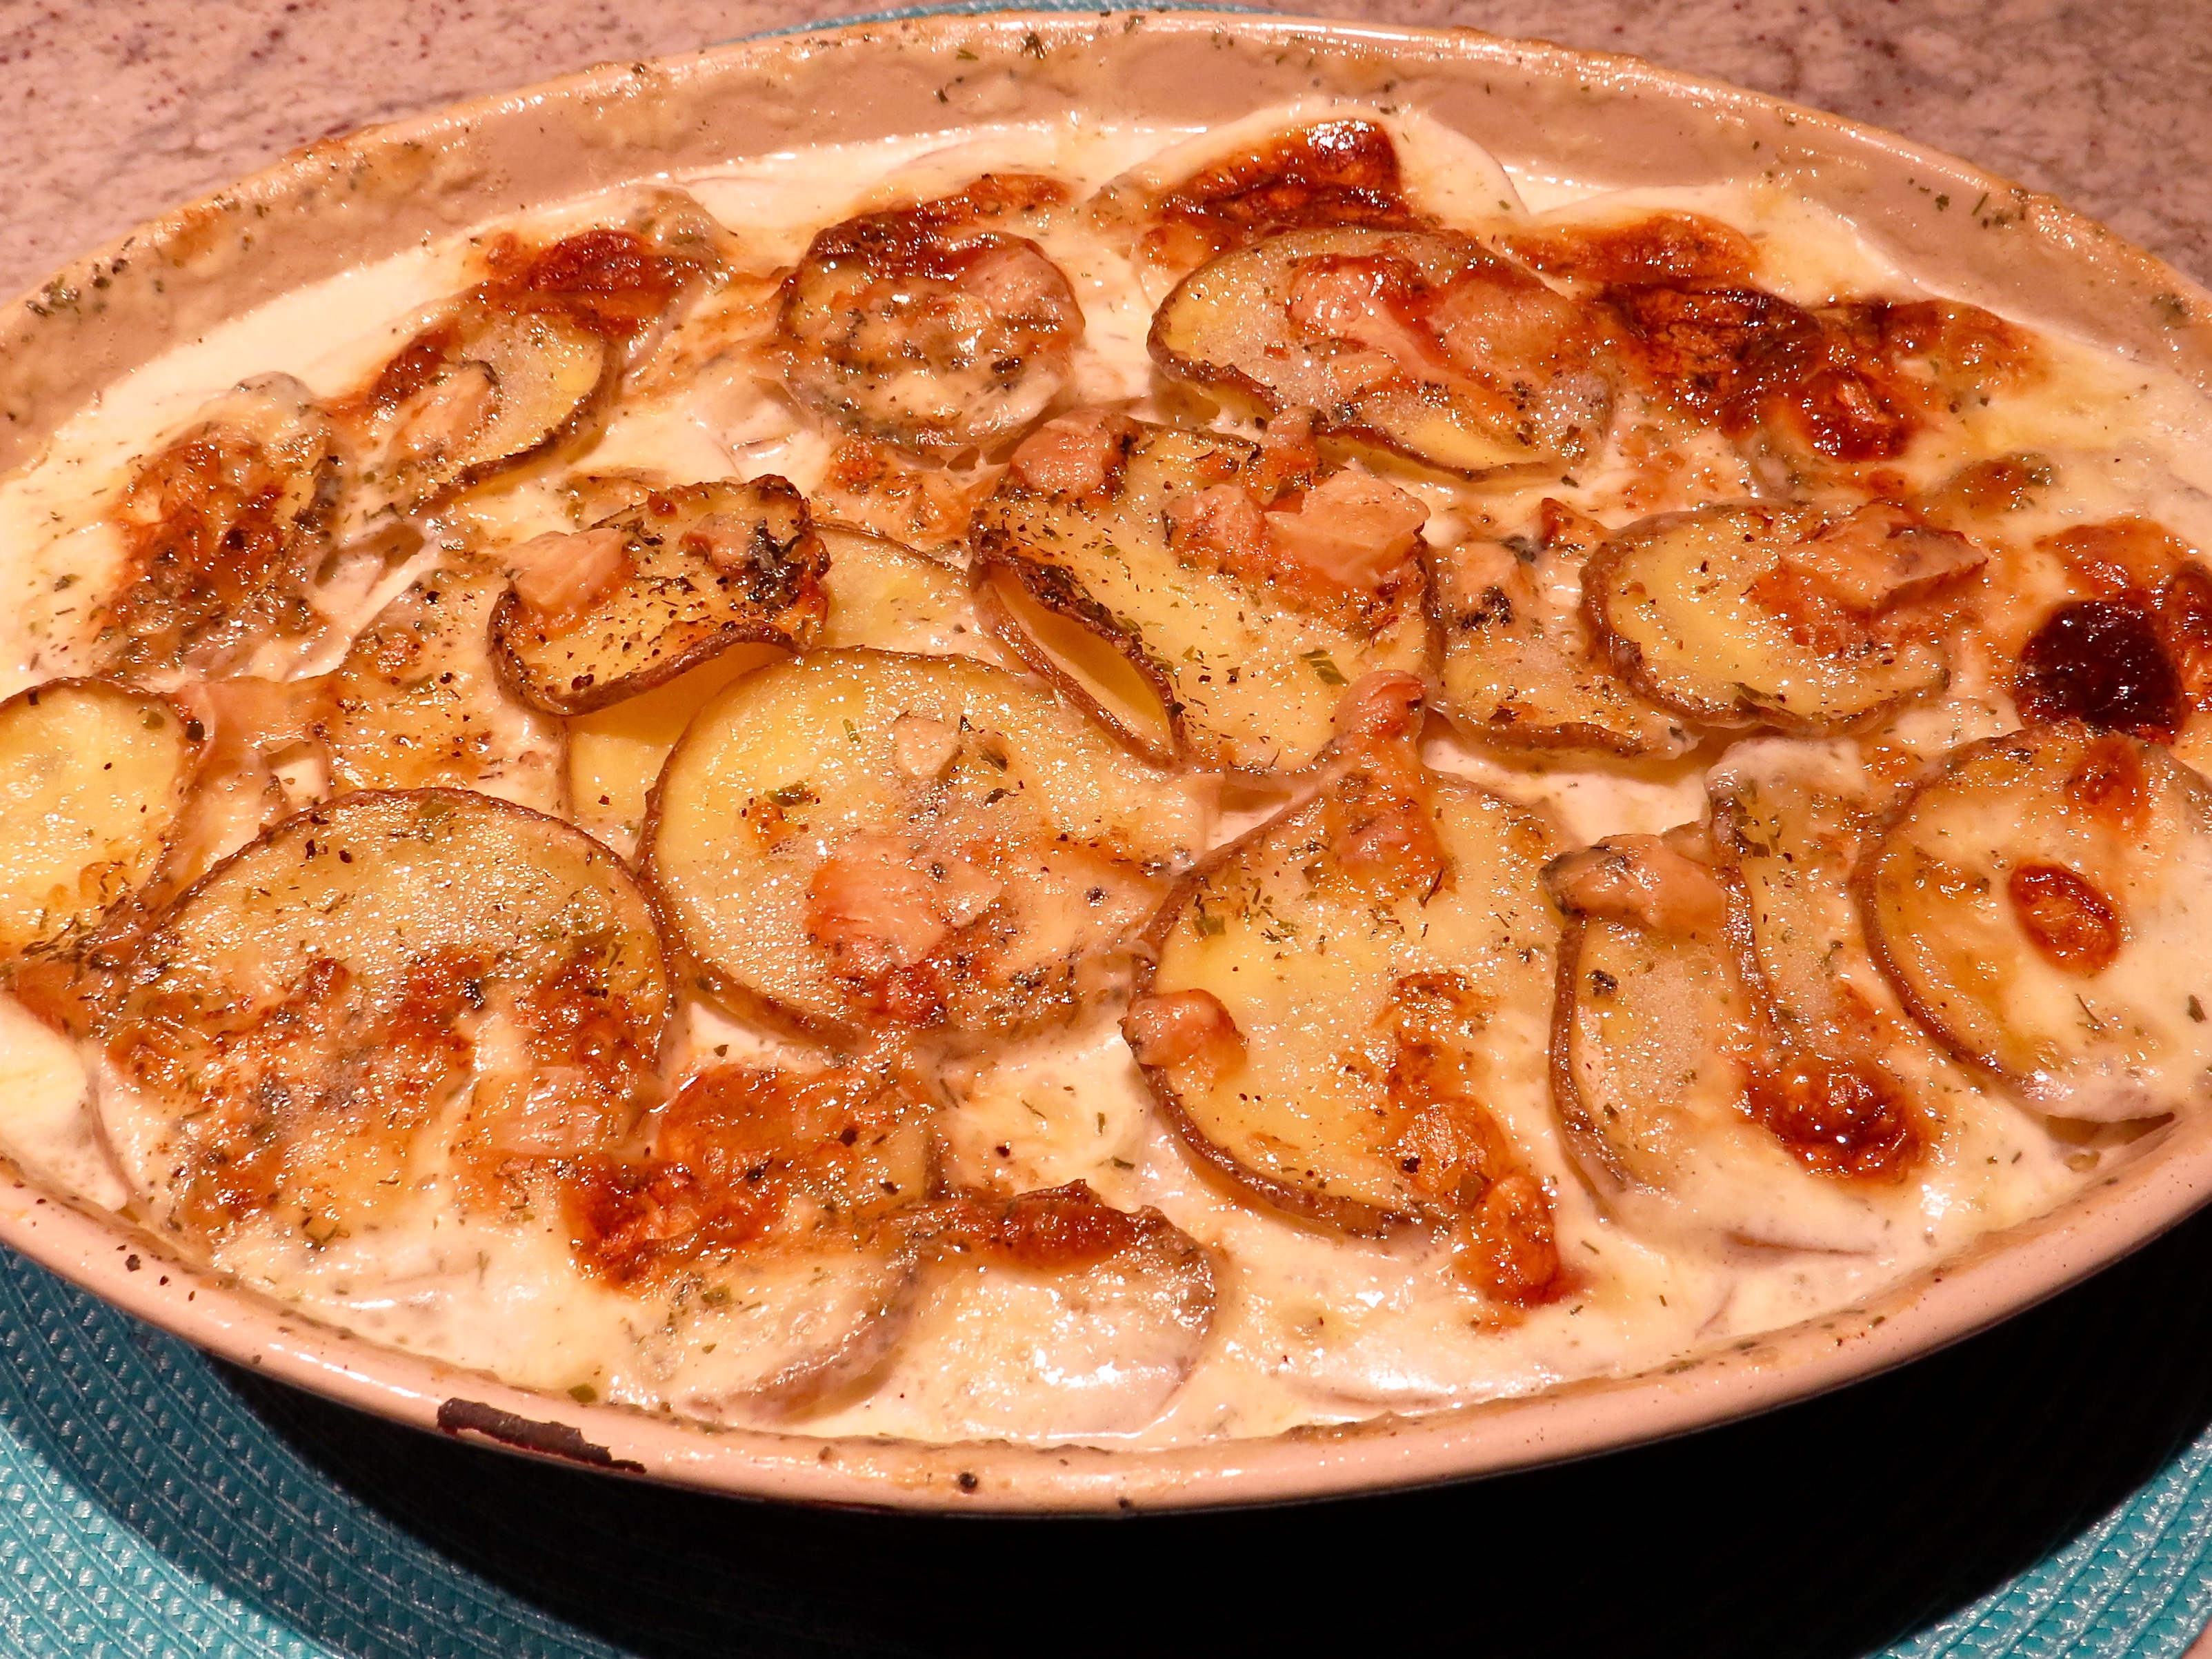 Recommended for Holidays - Scalloped Potatoes with Bleu Cheese and Roasted Garlic.